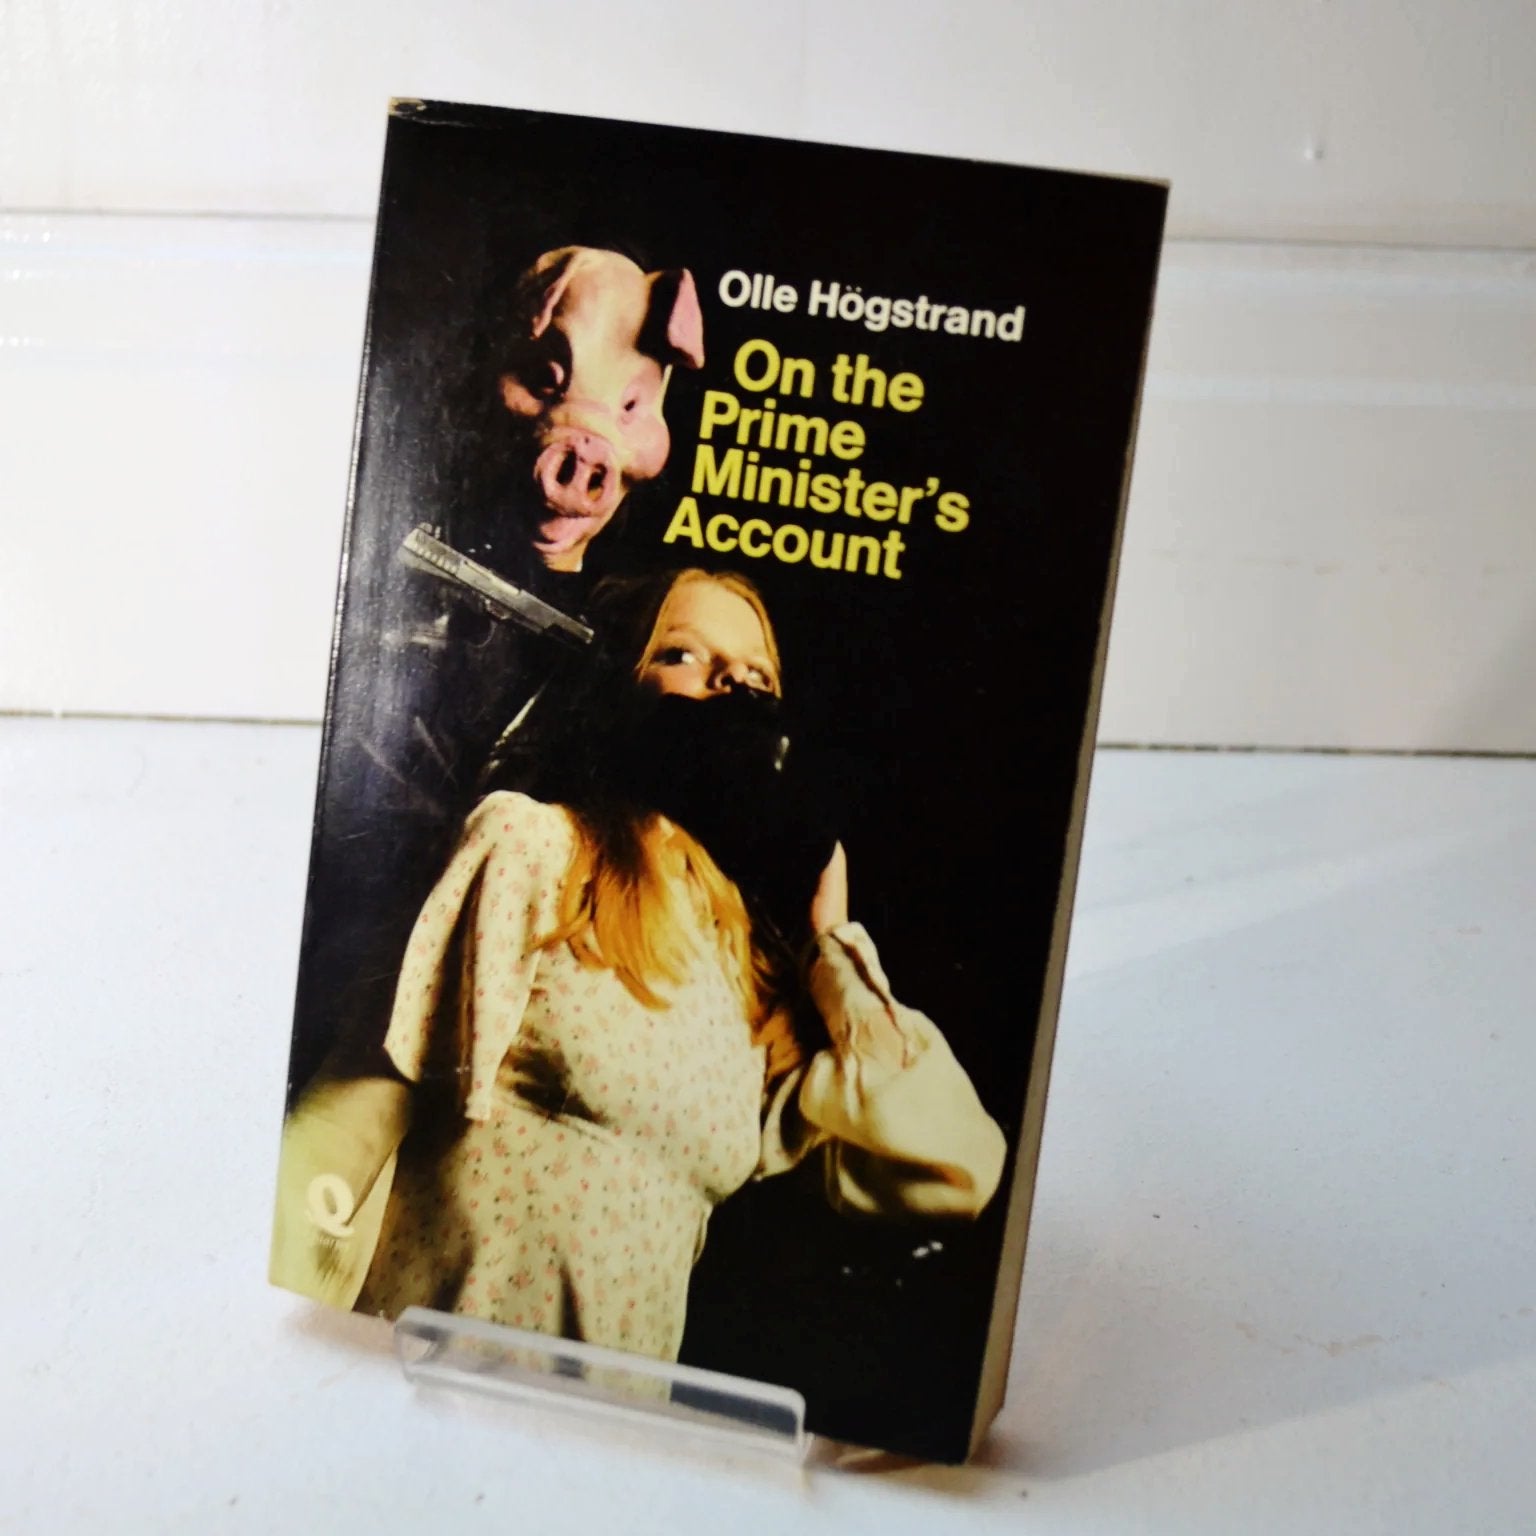 On the Prime minister's Account by Olle Hogstrand (Quartet / first pbk printing, 1974)